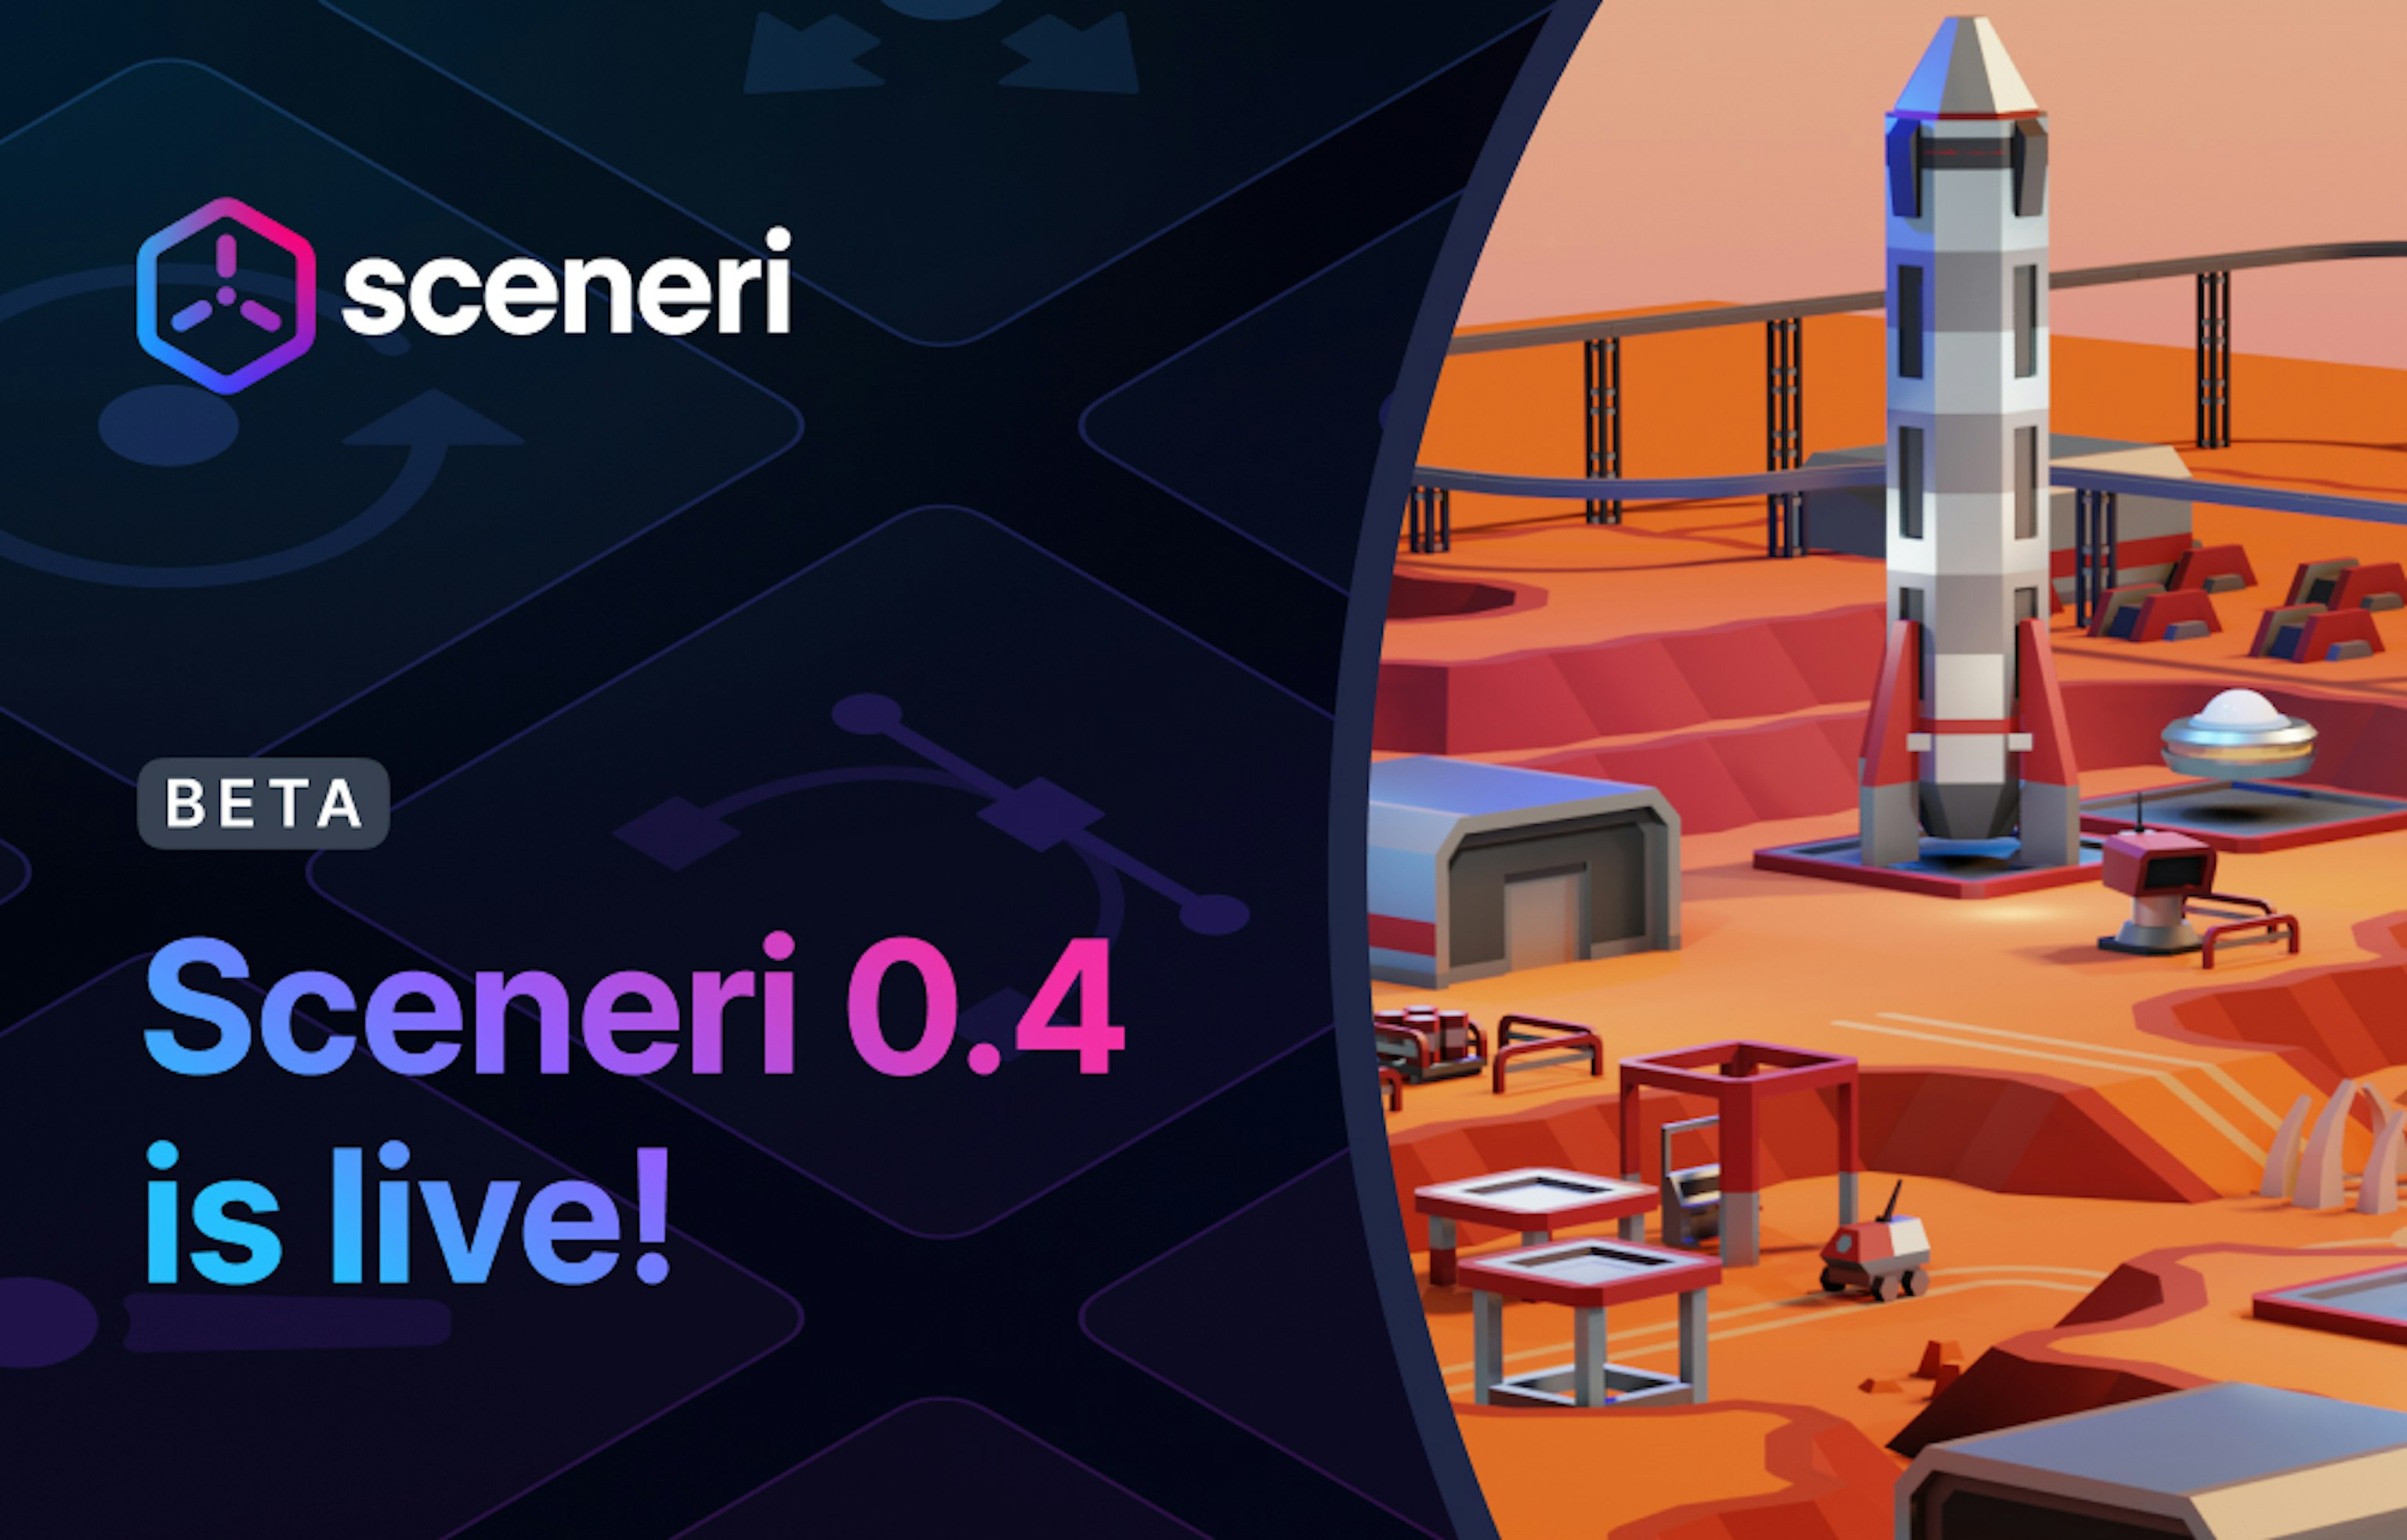 Bring your ideas to life in Sceneri 0.4, available now!